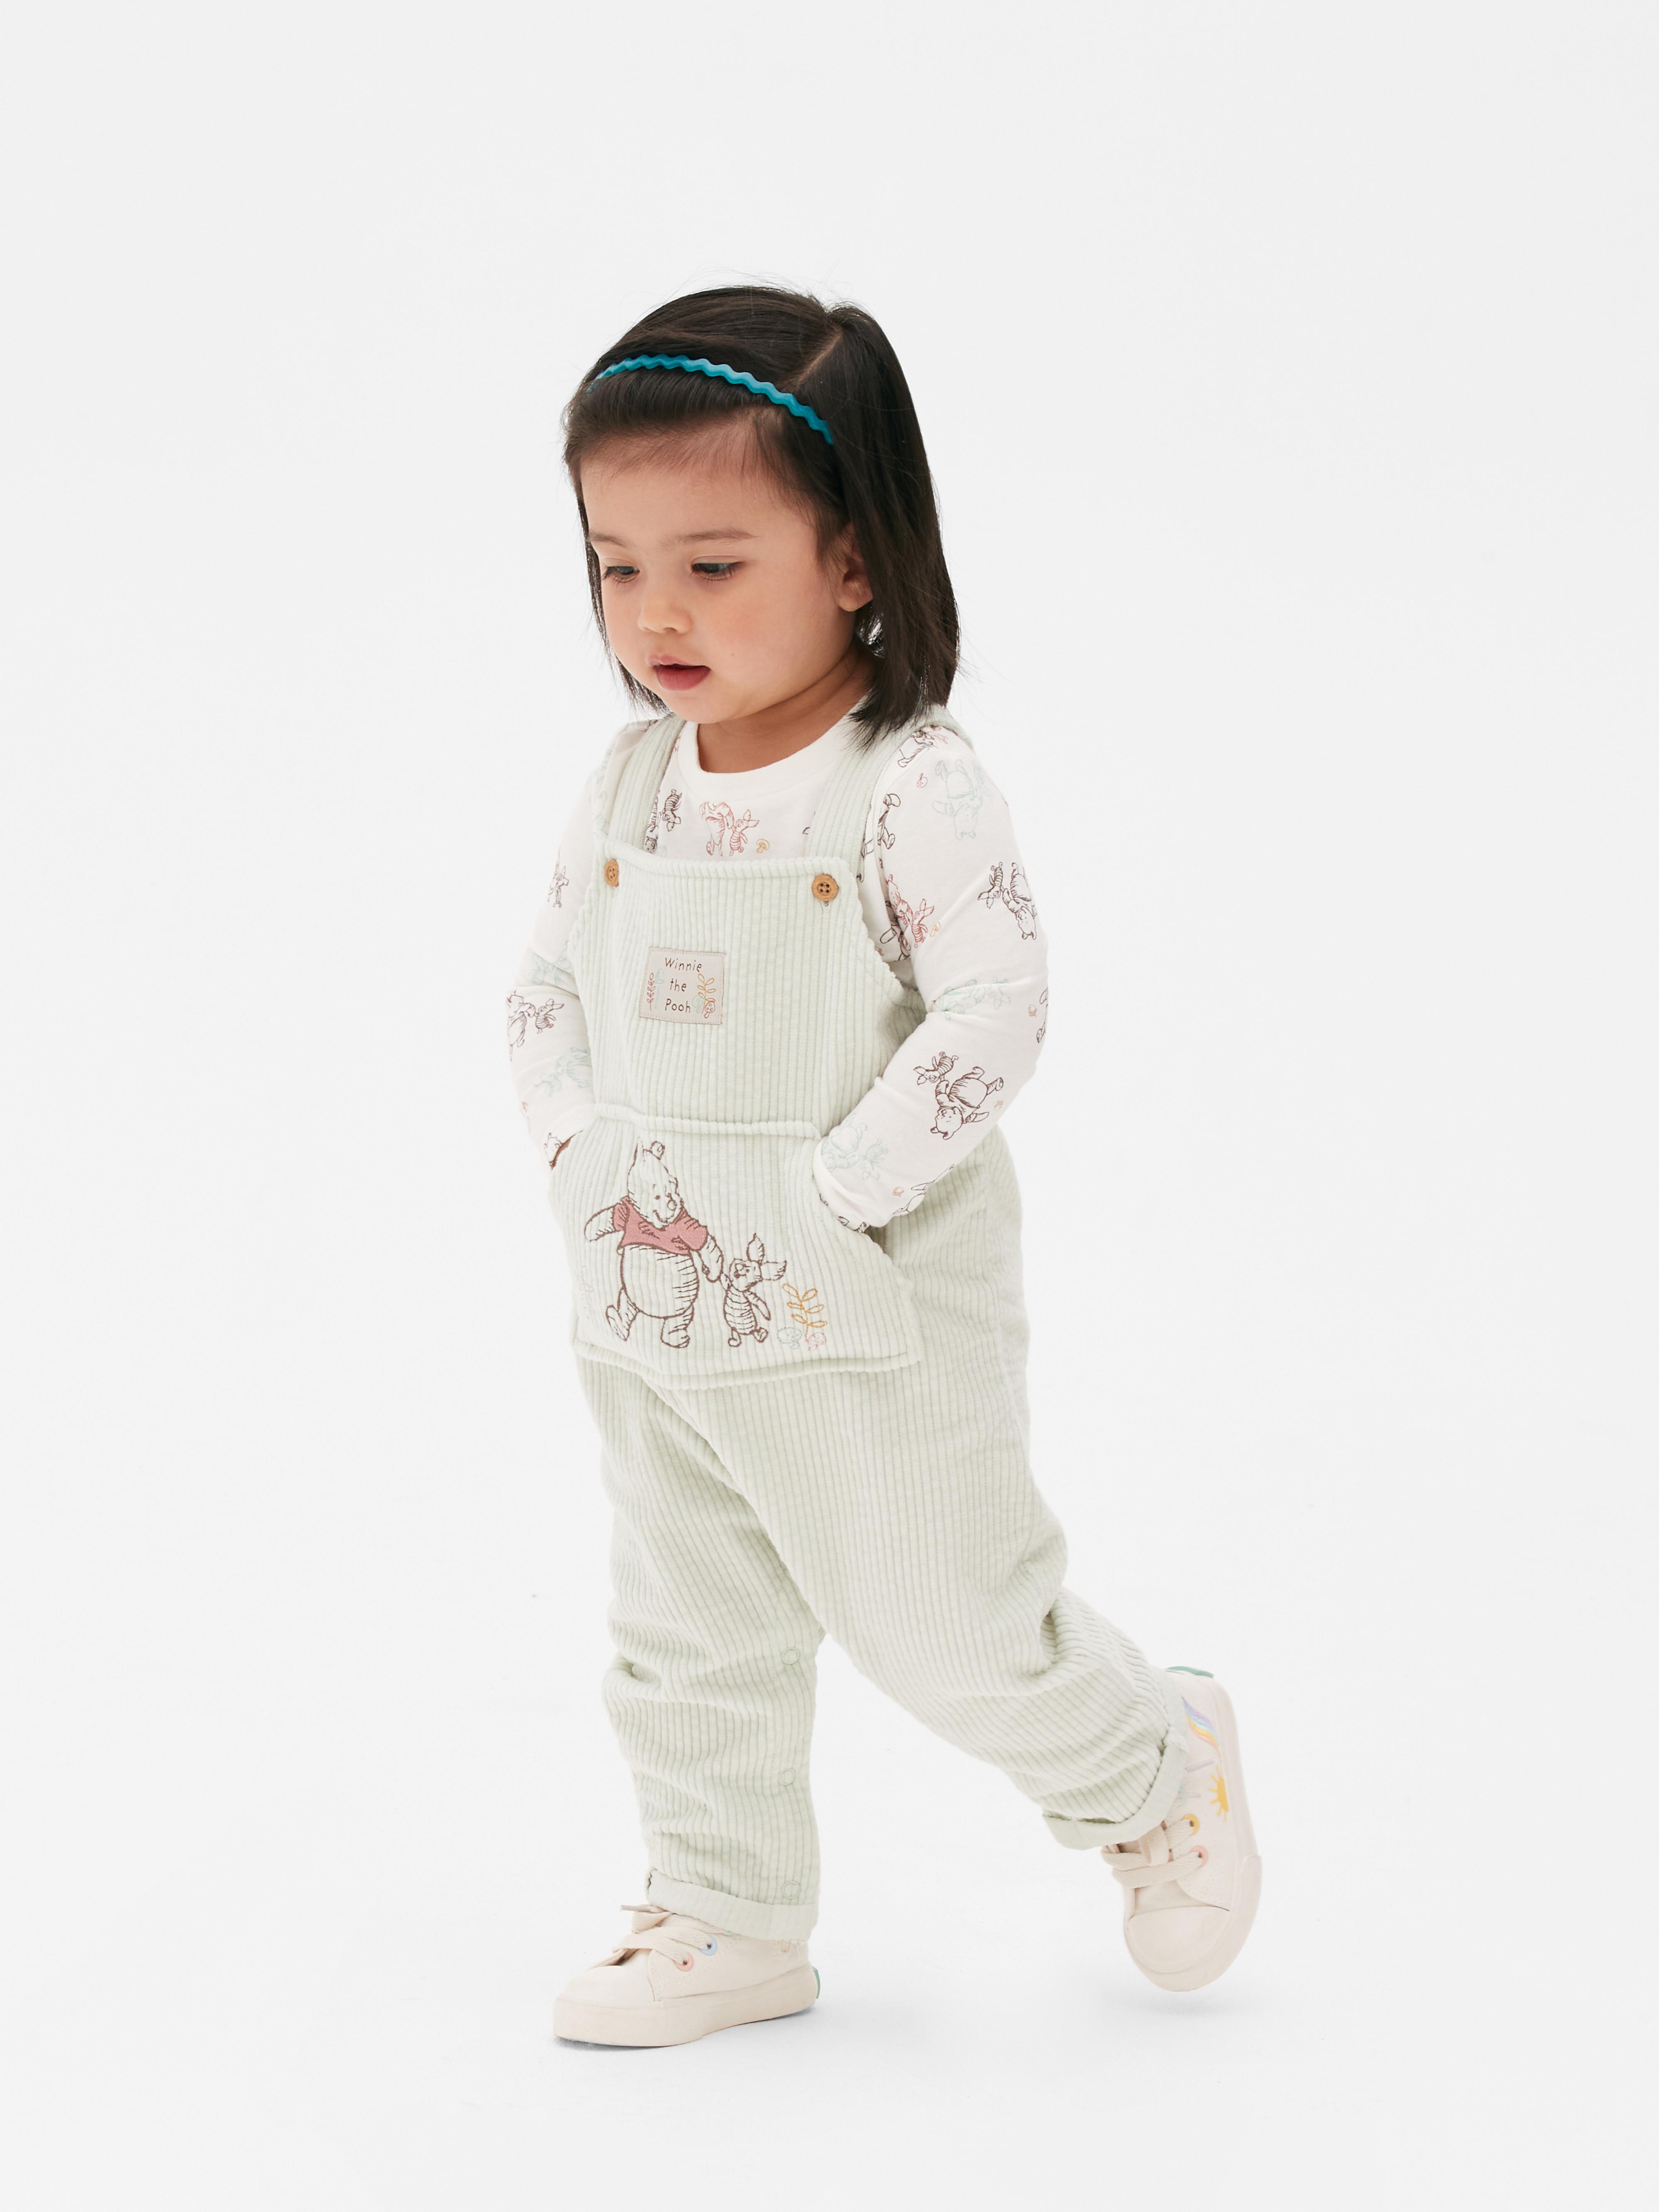 KIDS FASHION Baby Jumpsuits & Dungarees Corduroy Black 6Y Primark dungaree discount 68% 